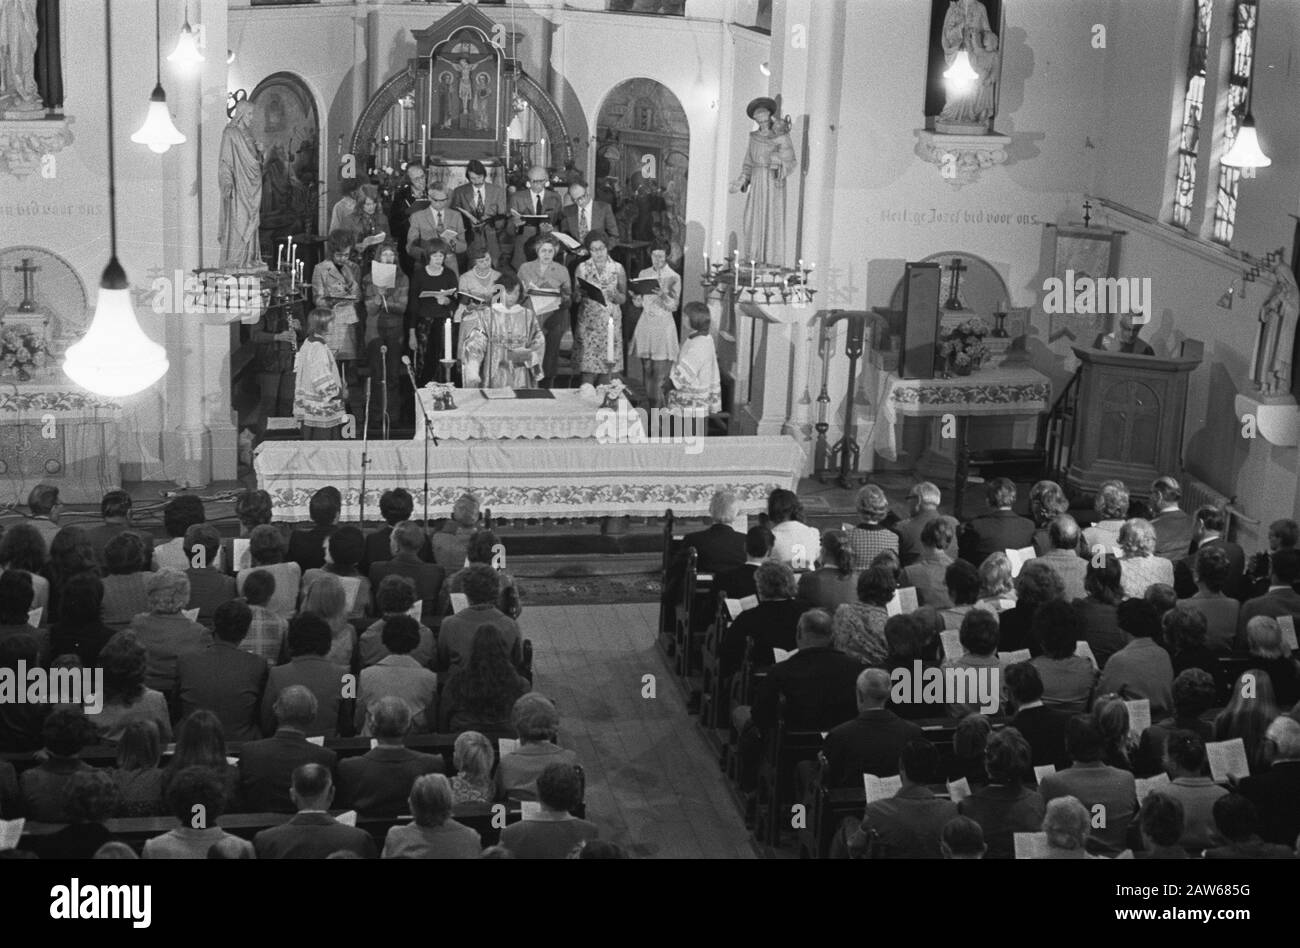 Last Mass at church Ruygoord, Mass is celebrated in church Date: July 22, 1973 Location: Amsterdam, Noord-Holland, Ruigoord Keywords: churches, missing Stock Photo